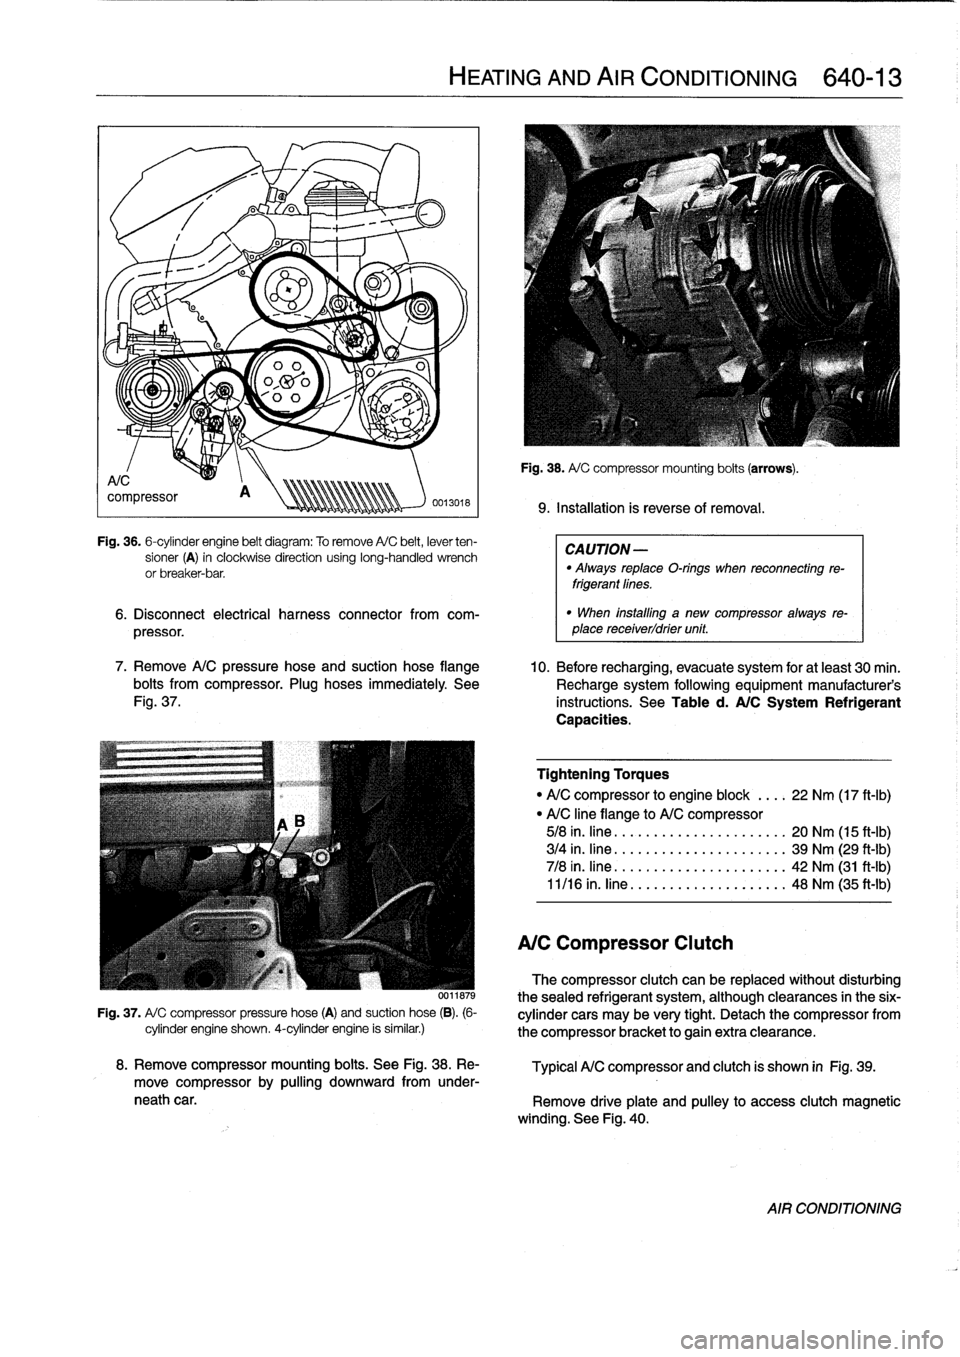 BMW M3 1995 E36 Owners Manual 
Fig
.
36
.
6-cylinder
engine
belt
diagram
:
To
remove
A/C
belt,
lever
ten-
sioner
(A)
in
clockwise
direction
using
long-handled
wrench
or
breaker-bar
.

6
.
Disconnect
electrical
harness
connector
fr